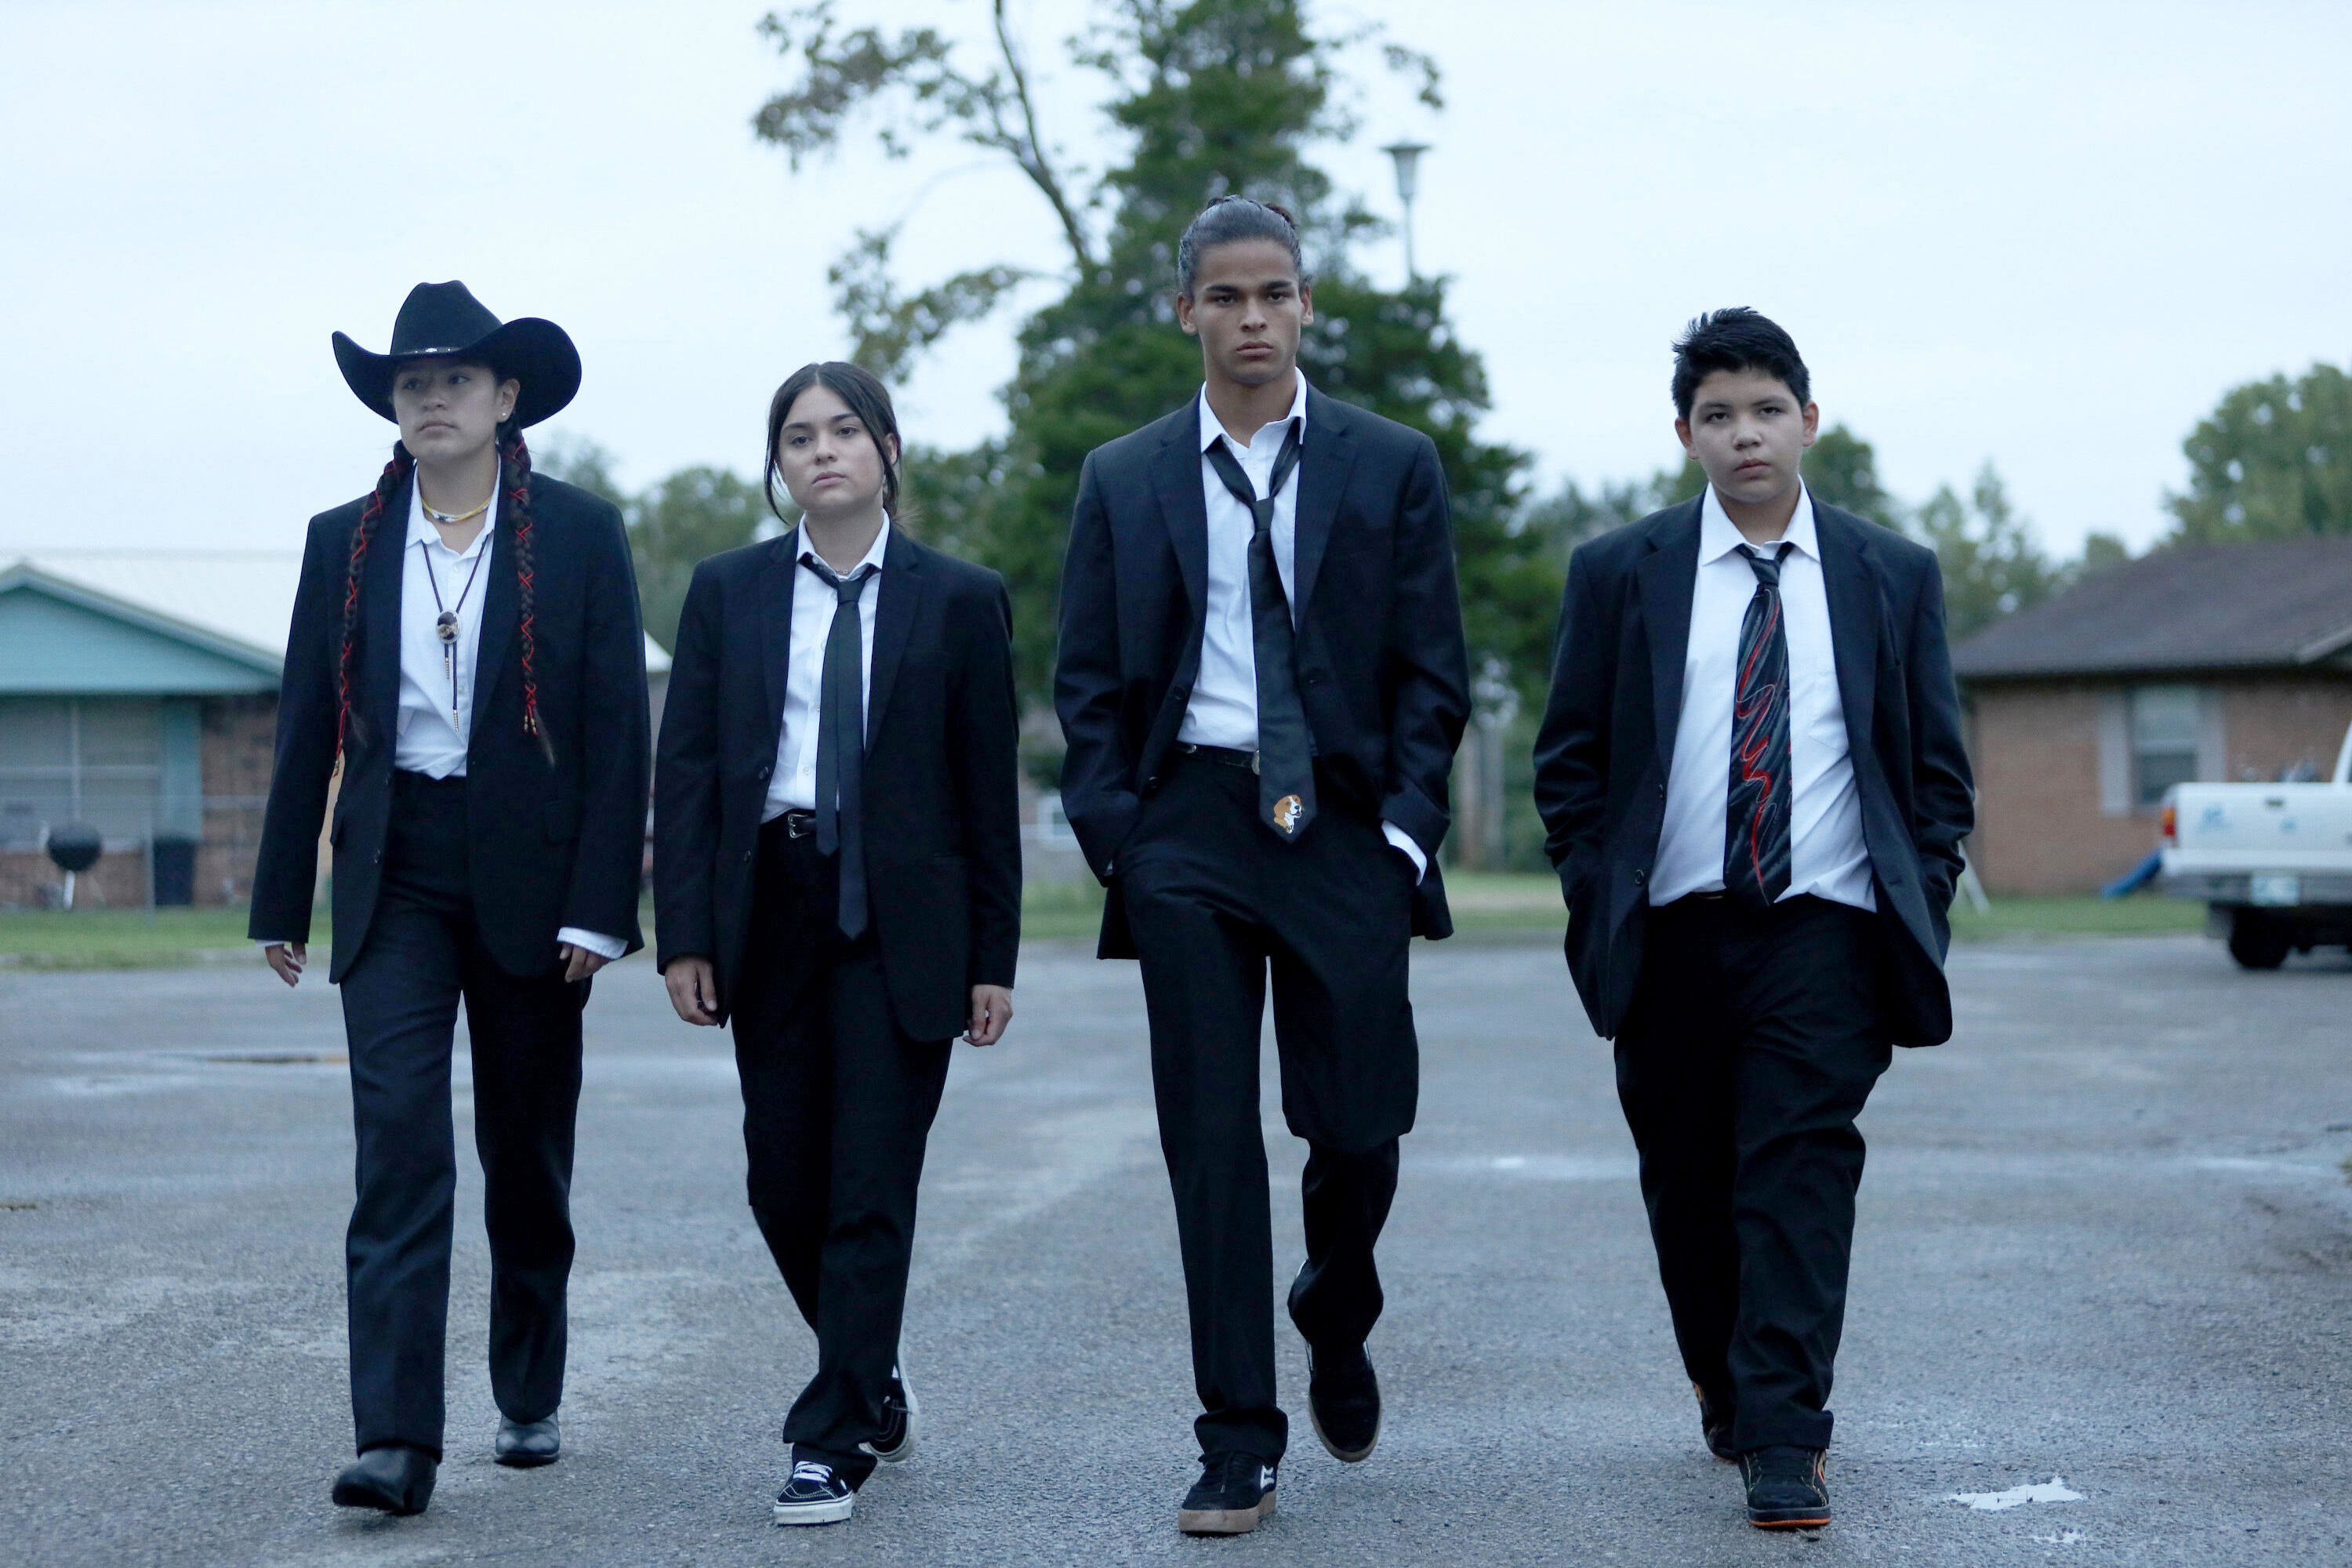 Four teens wearing suits and walking together